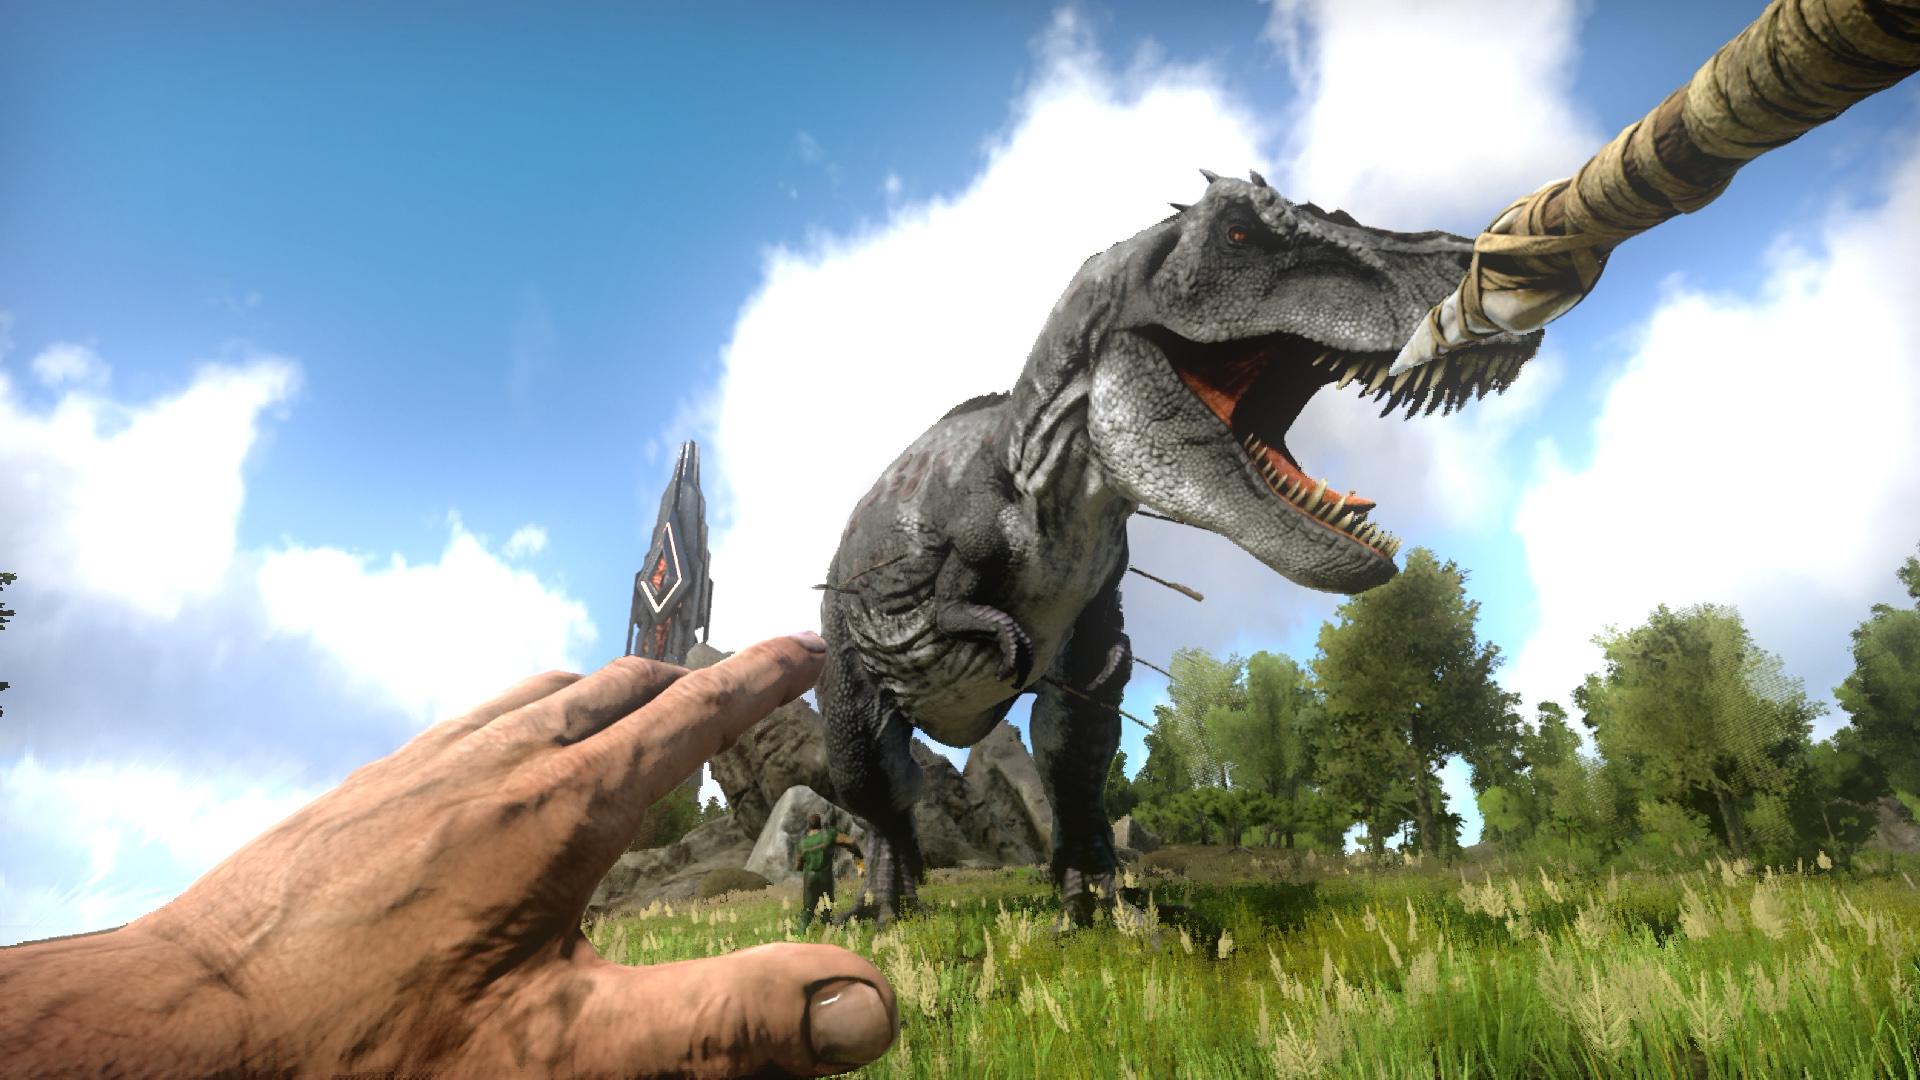 ARK: Survival Evolved Confirmed For Nintendo Switch, Coming Later This Year